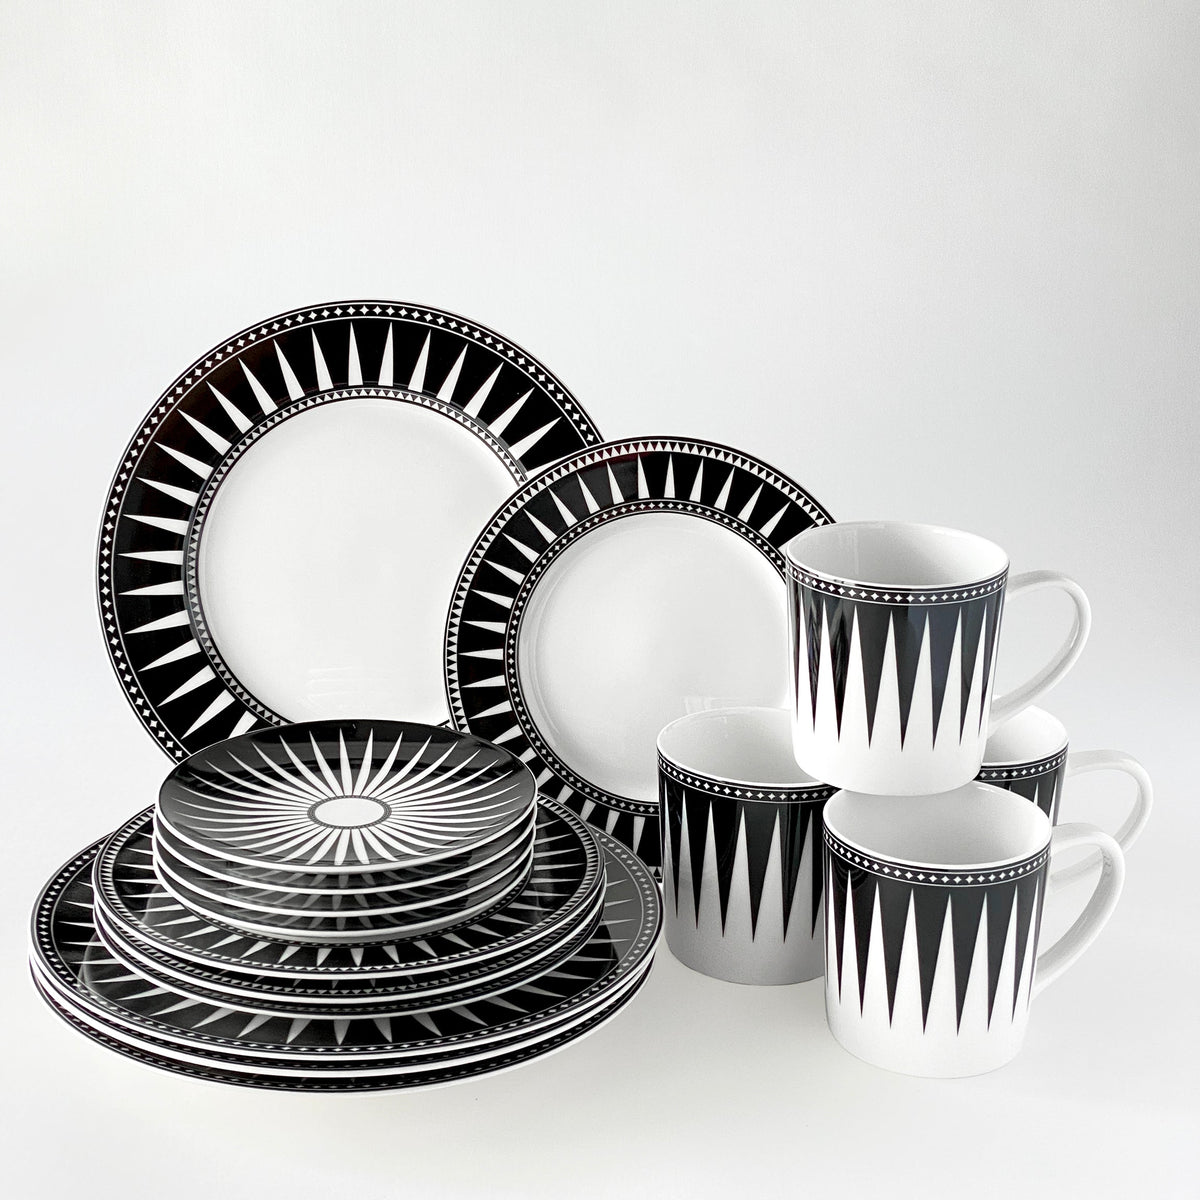 The Caskata Artisanal Home Marrakech Black Rimmed Dinner Plate features a bold patterned black and white dinnerware set showcased on a crisp white background, invoking the vibrant ambiance of Marrakech.